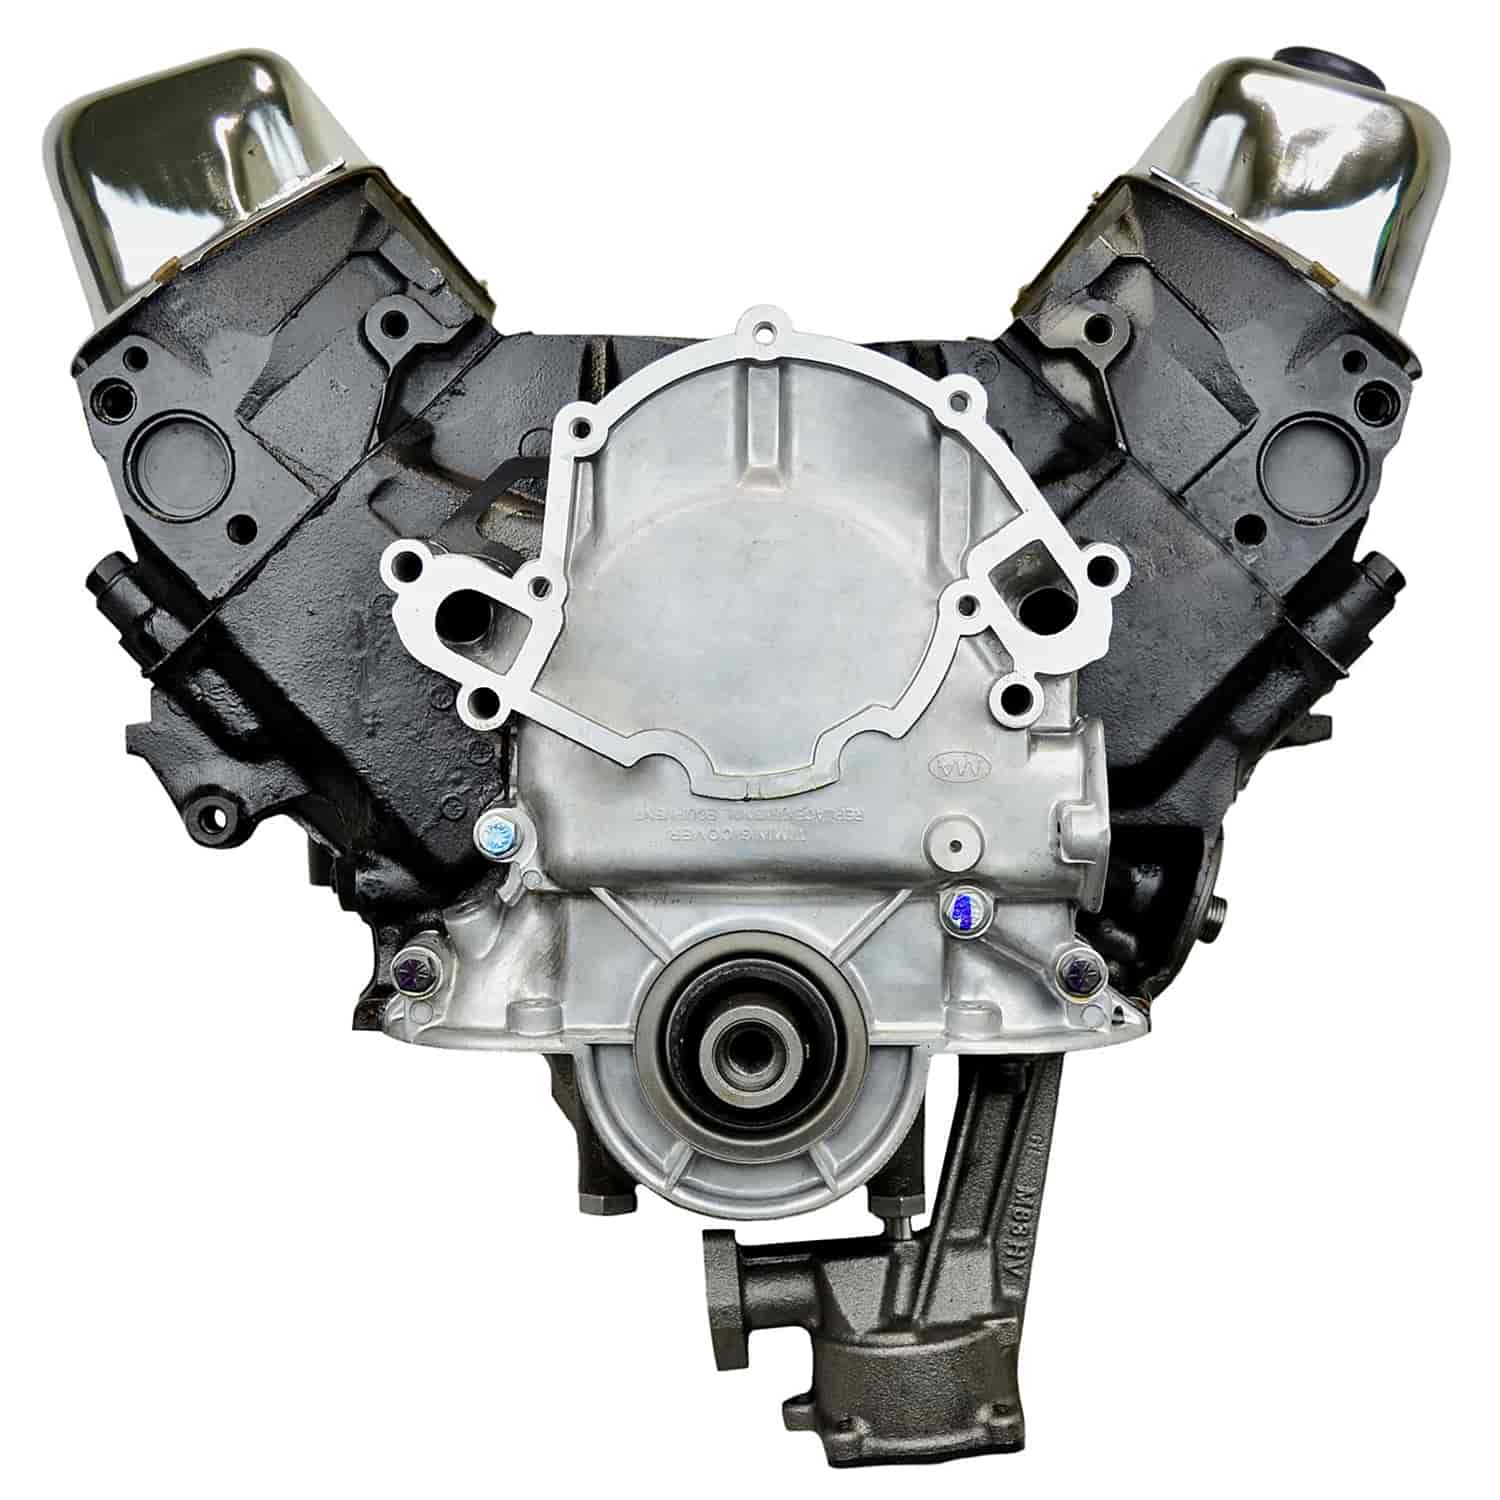 Remanufactured Crate Engine for 1975-1985 Ford/Lincoln/Mercury Car & F-Series Truck with 351W V8